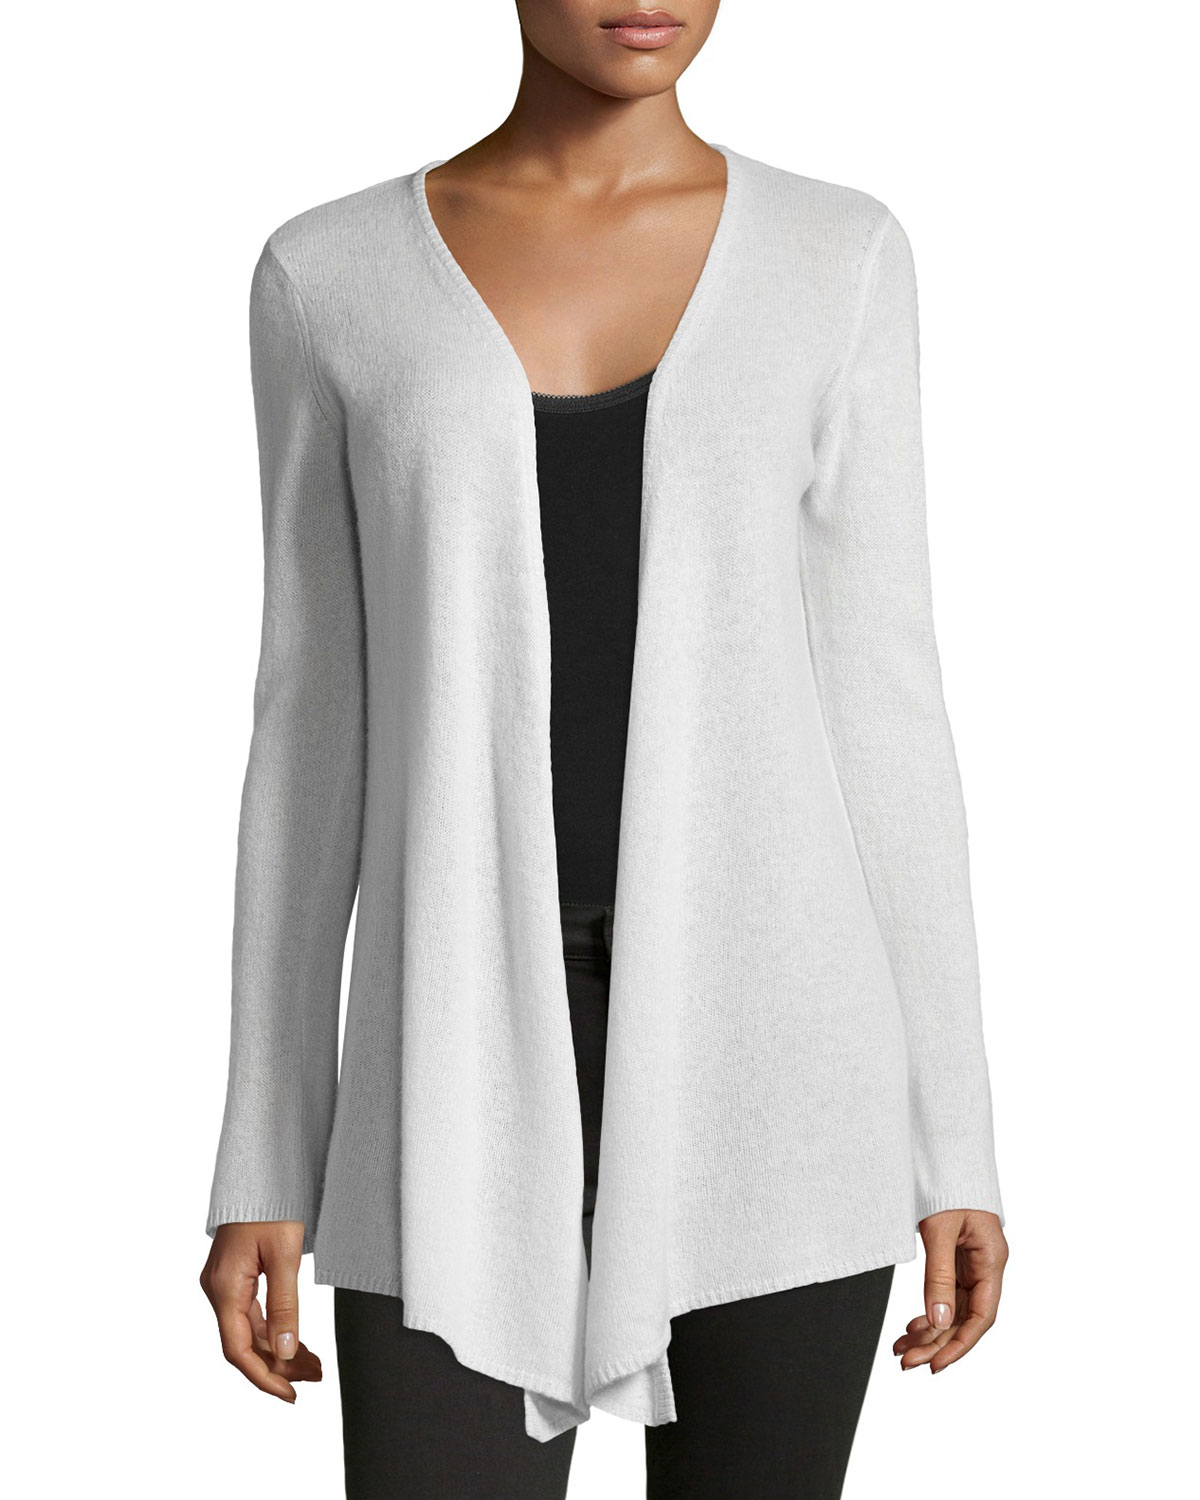 Minnie rose Cashmere Open-front Duster Cardigan in White | Lyst